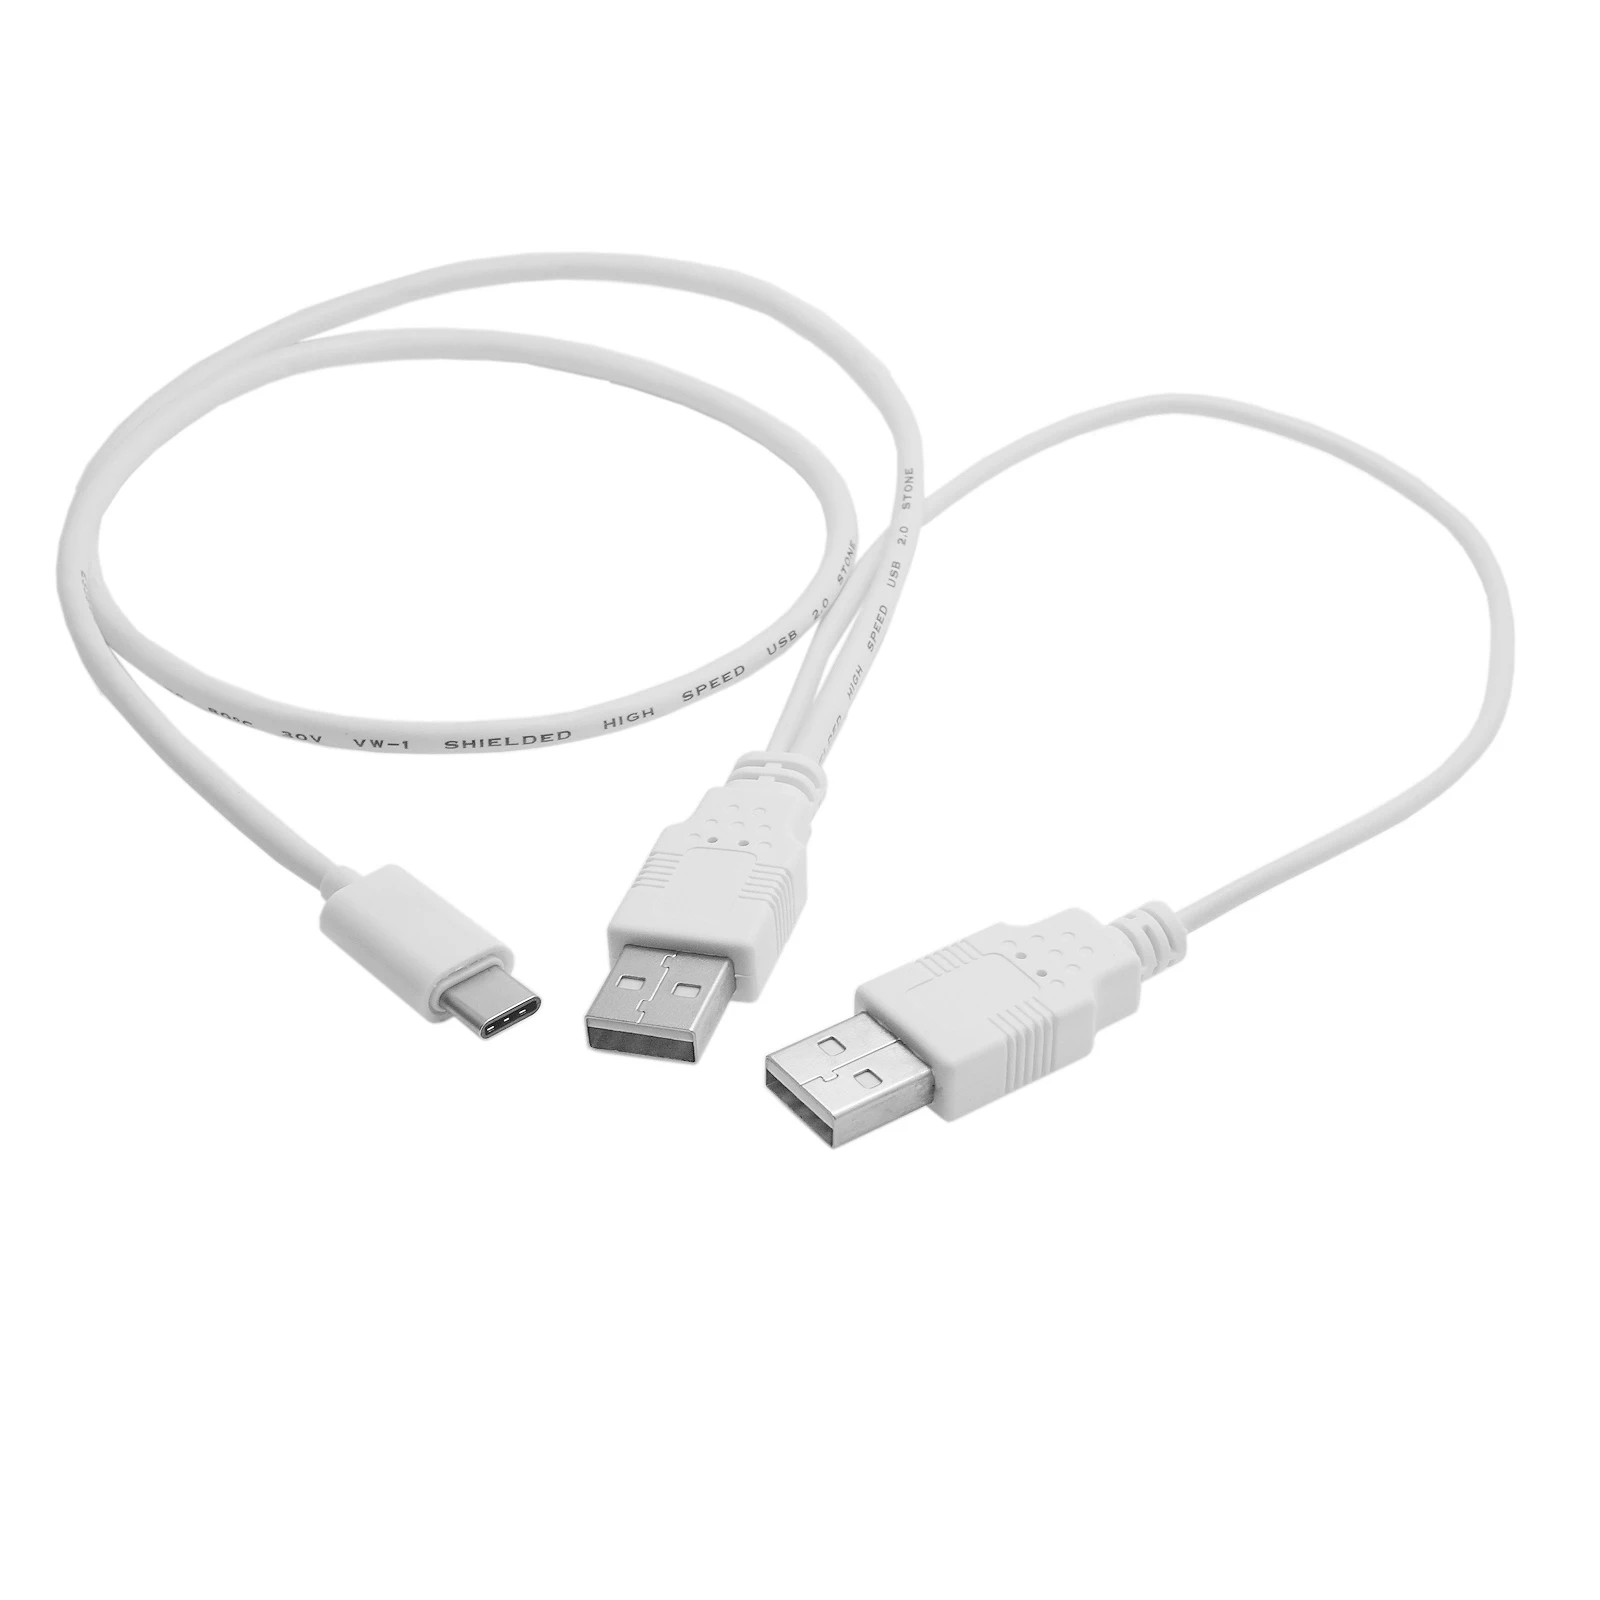 Usb-c Y Cable Usb Type-c Female Connector To Dual Micro Usb Male Usbc 2.0  Splitter 1 Female To 2 Male Data Charge Extension Cord - Pc Hardware Cables  & Adapters - AliExpress